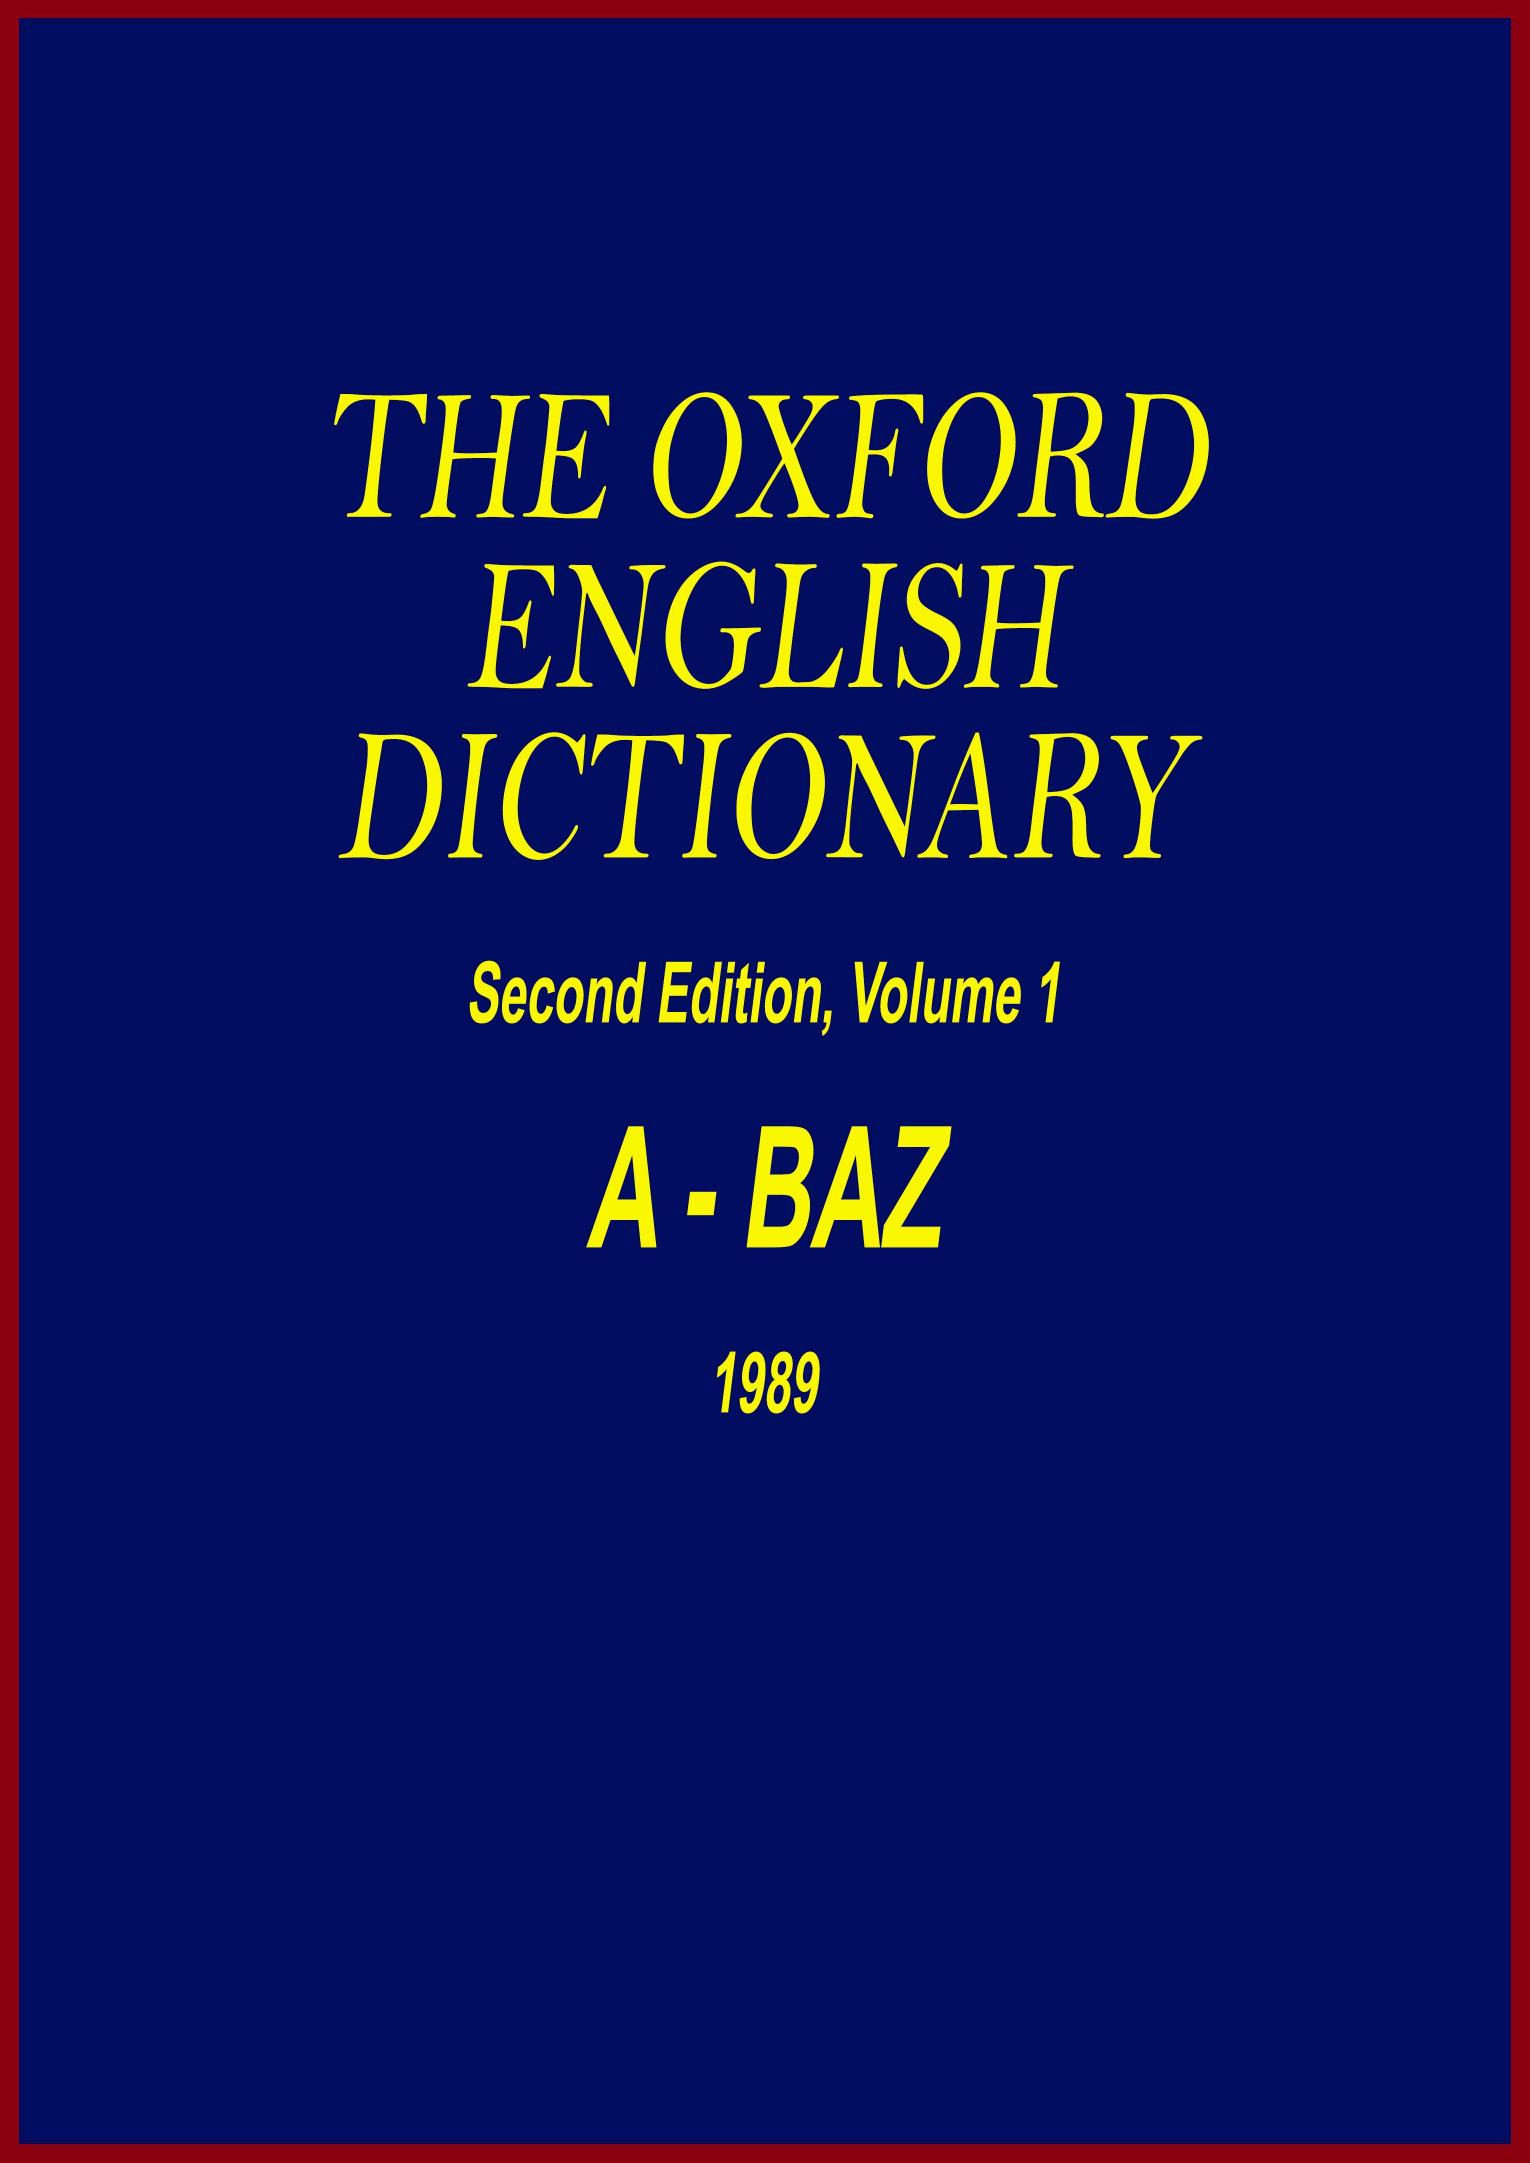 The Oxford English Dictionary - A-BAZ